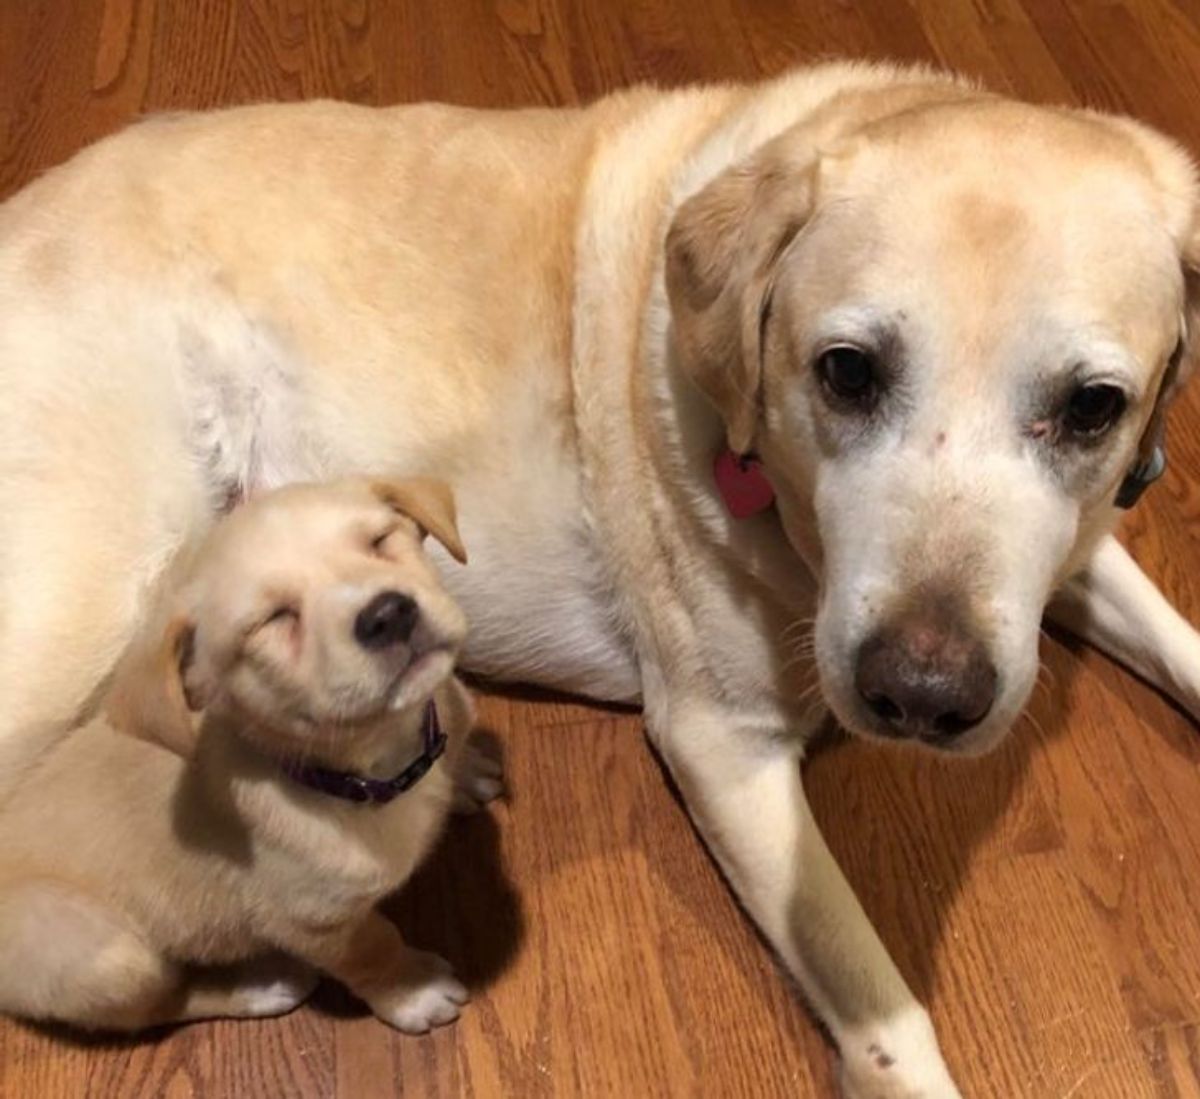 old golden retriever laying on the floor with a golden retriever puppy sitting by it